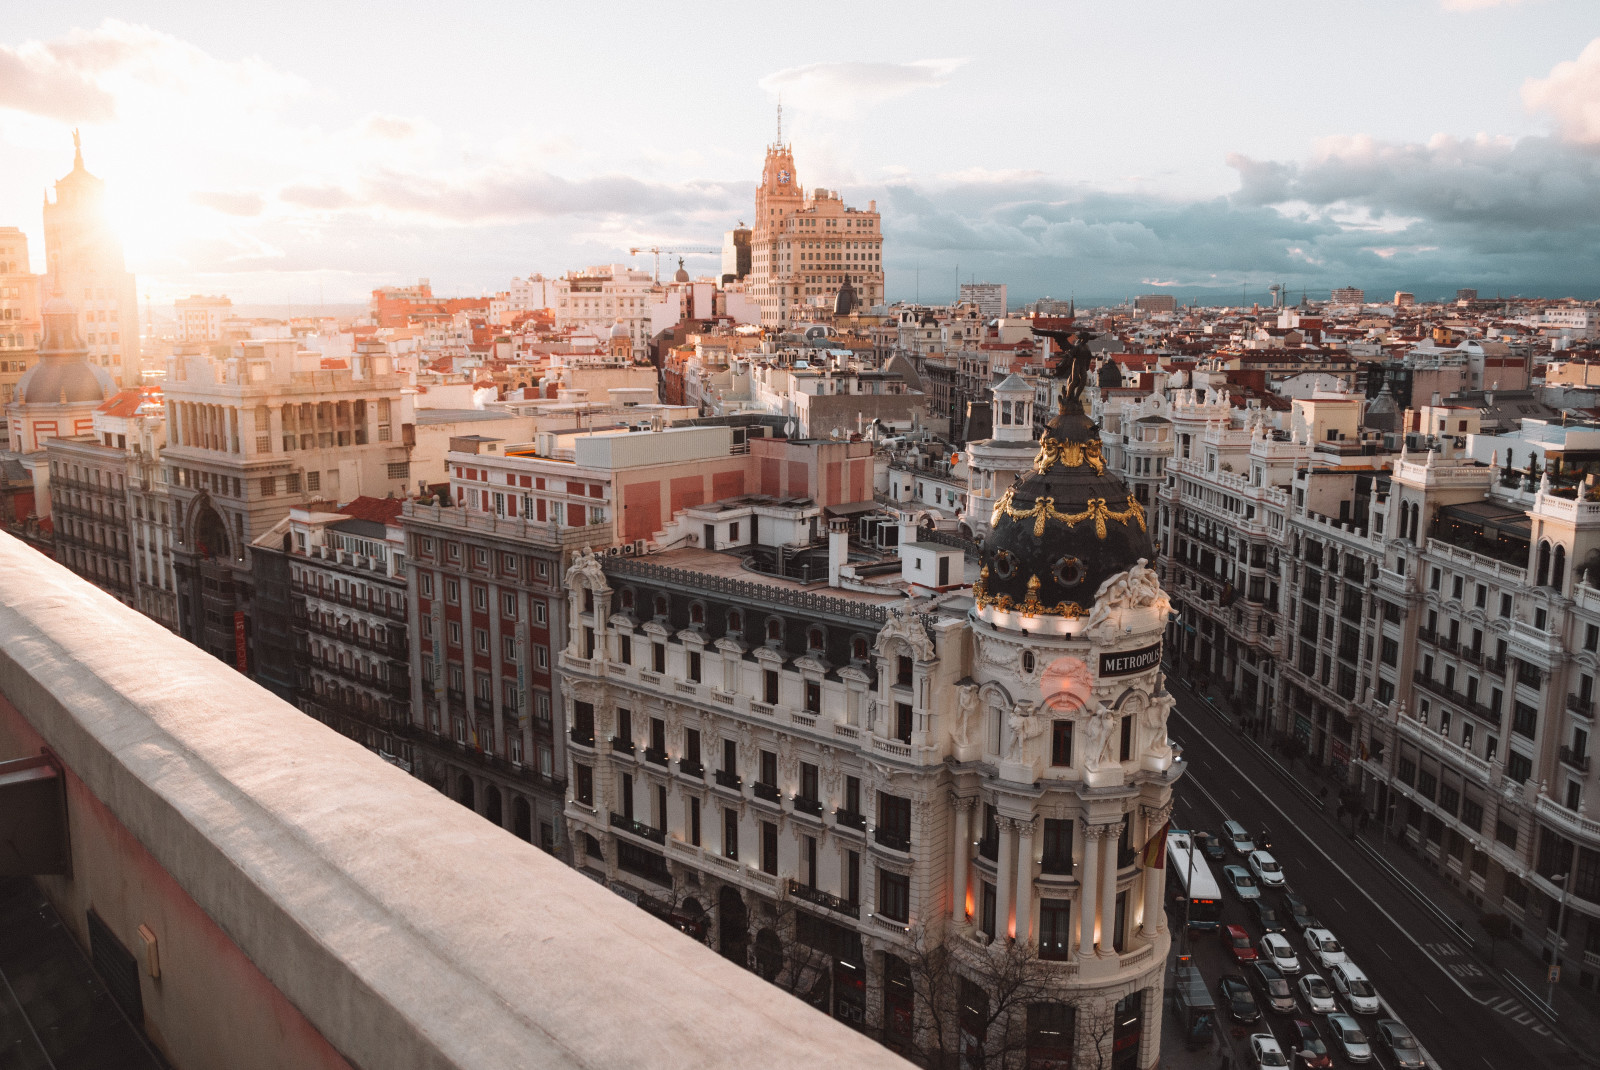 Rooftop overlooking buildings and streets of Madrid, Spain at sunset